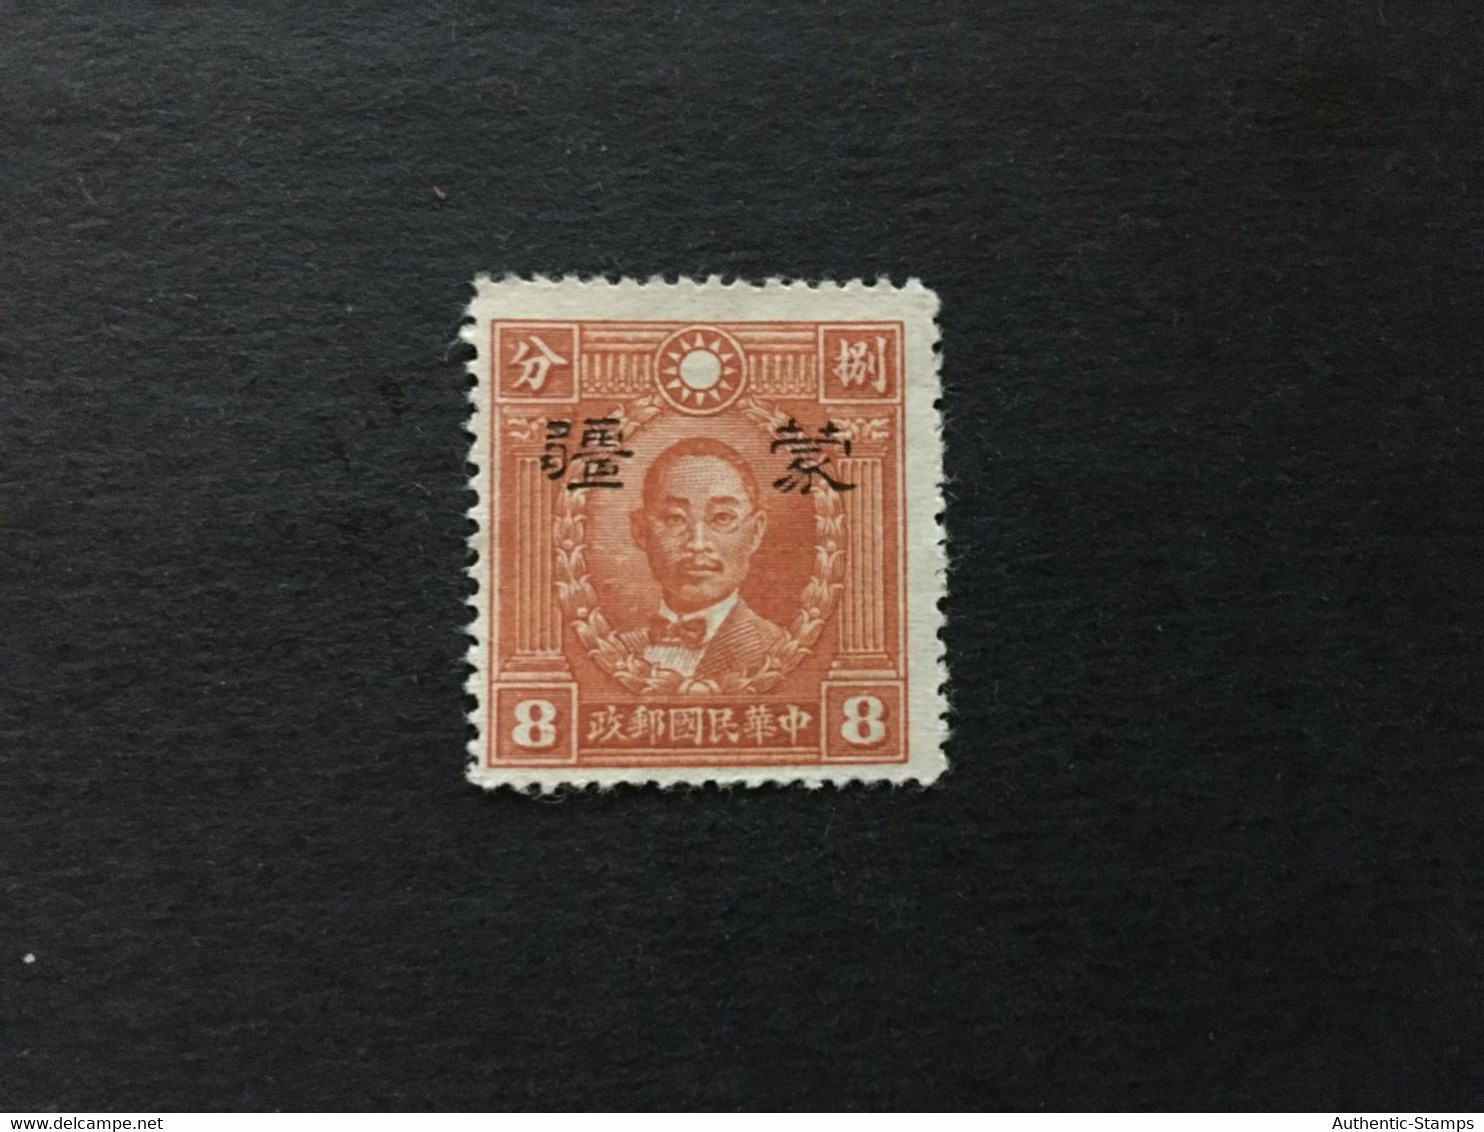 CHINA STAMP,  2 OVERPRINT STAMPS, UnUSED, TIMBRO, STEMPEL, CINA, CHINE, LIST 5561 - 1941-45 China Dela Norte